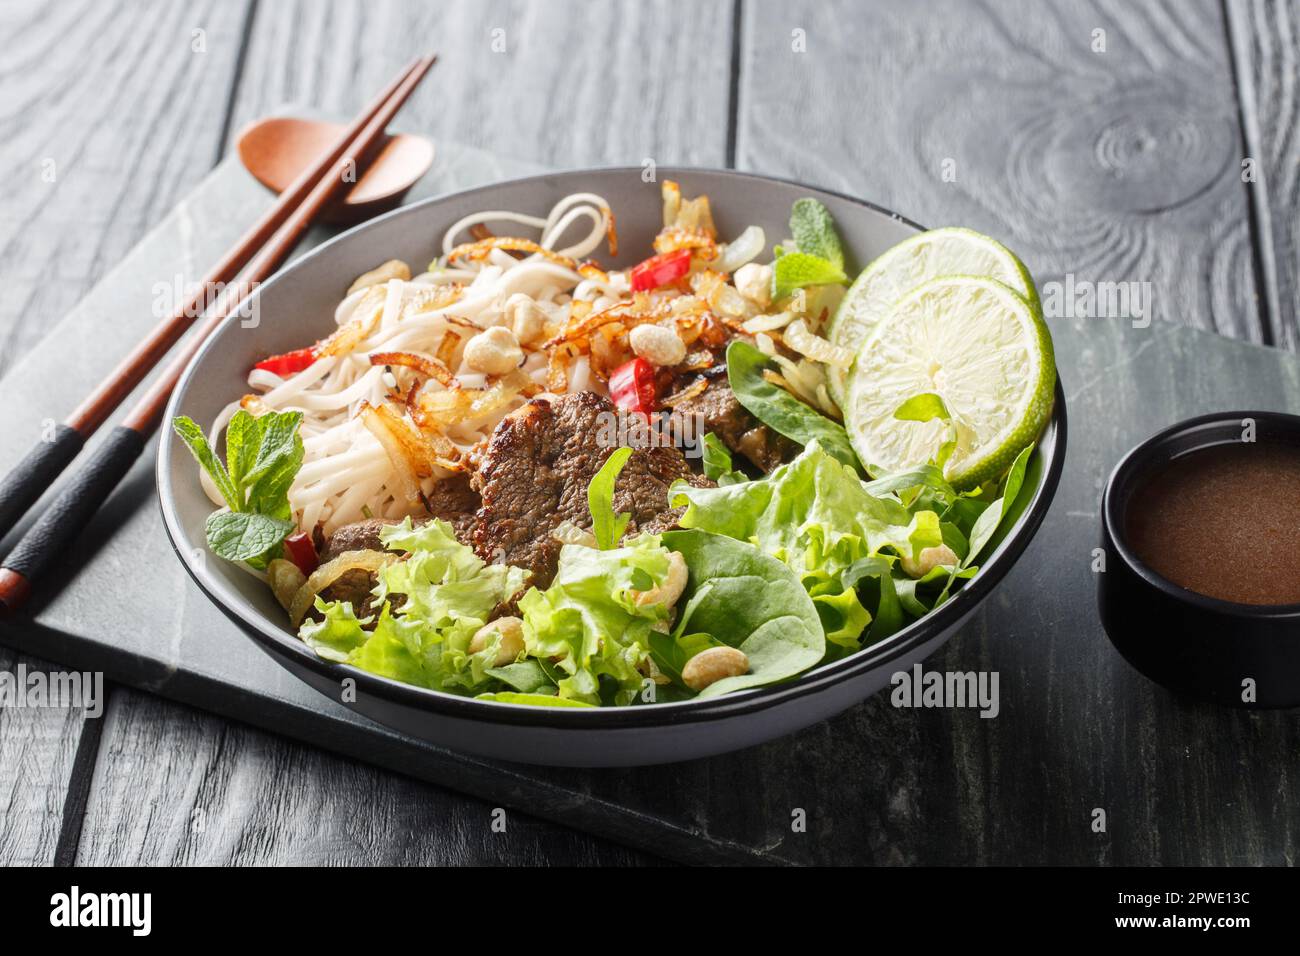 Pho Bo Tron Mixed beef noodles salad is a popular dish in Vietnamese cuisine closeup on the bowl on a wooden table. Horizontal Stock Photo